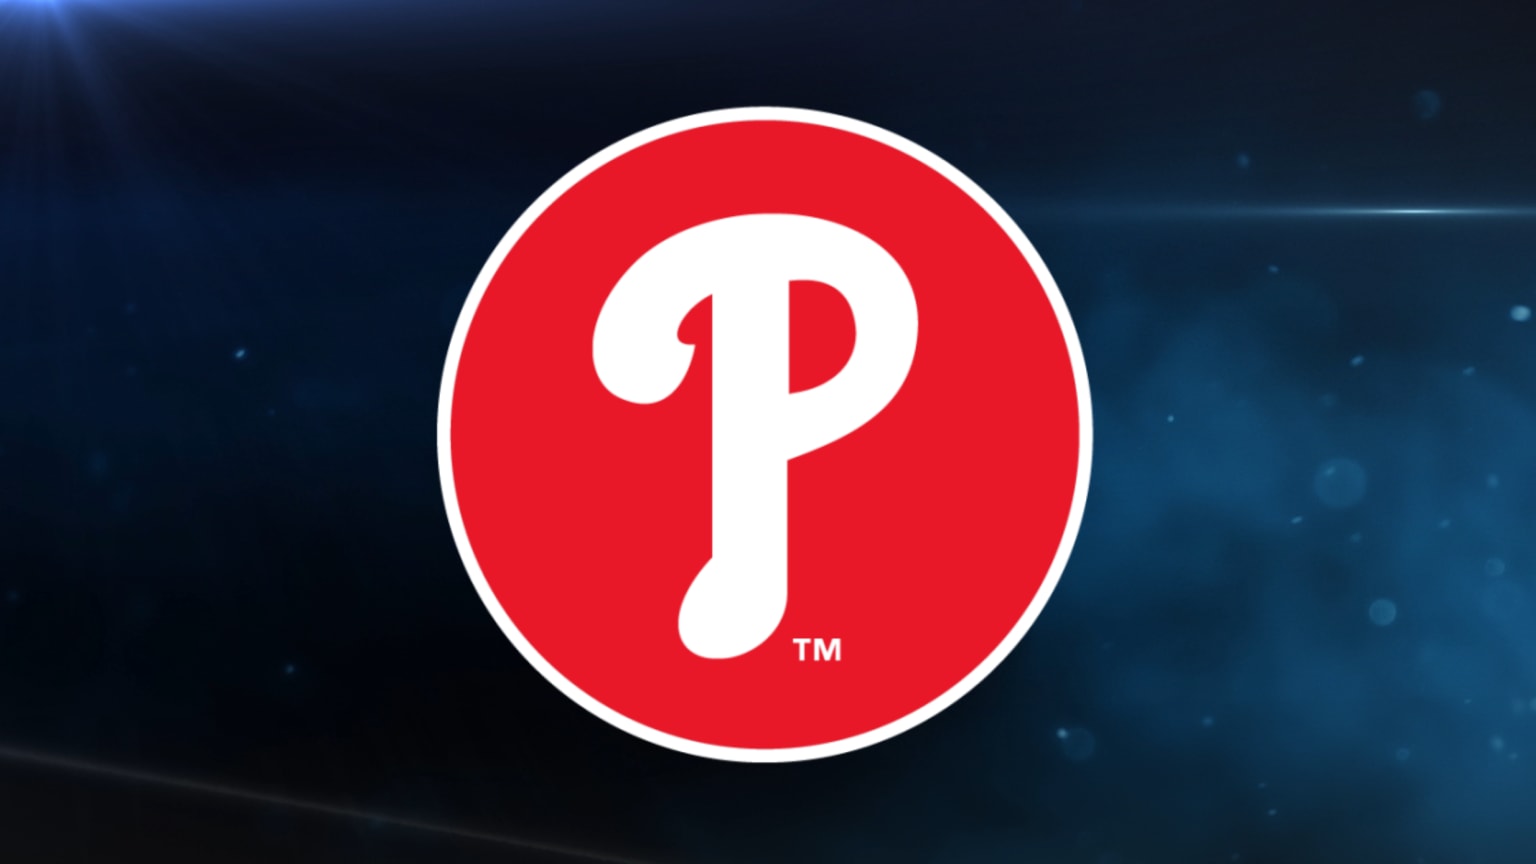 Philadelphia Phillies - Presenting: Our 2021 Nemours Opening Day